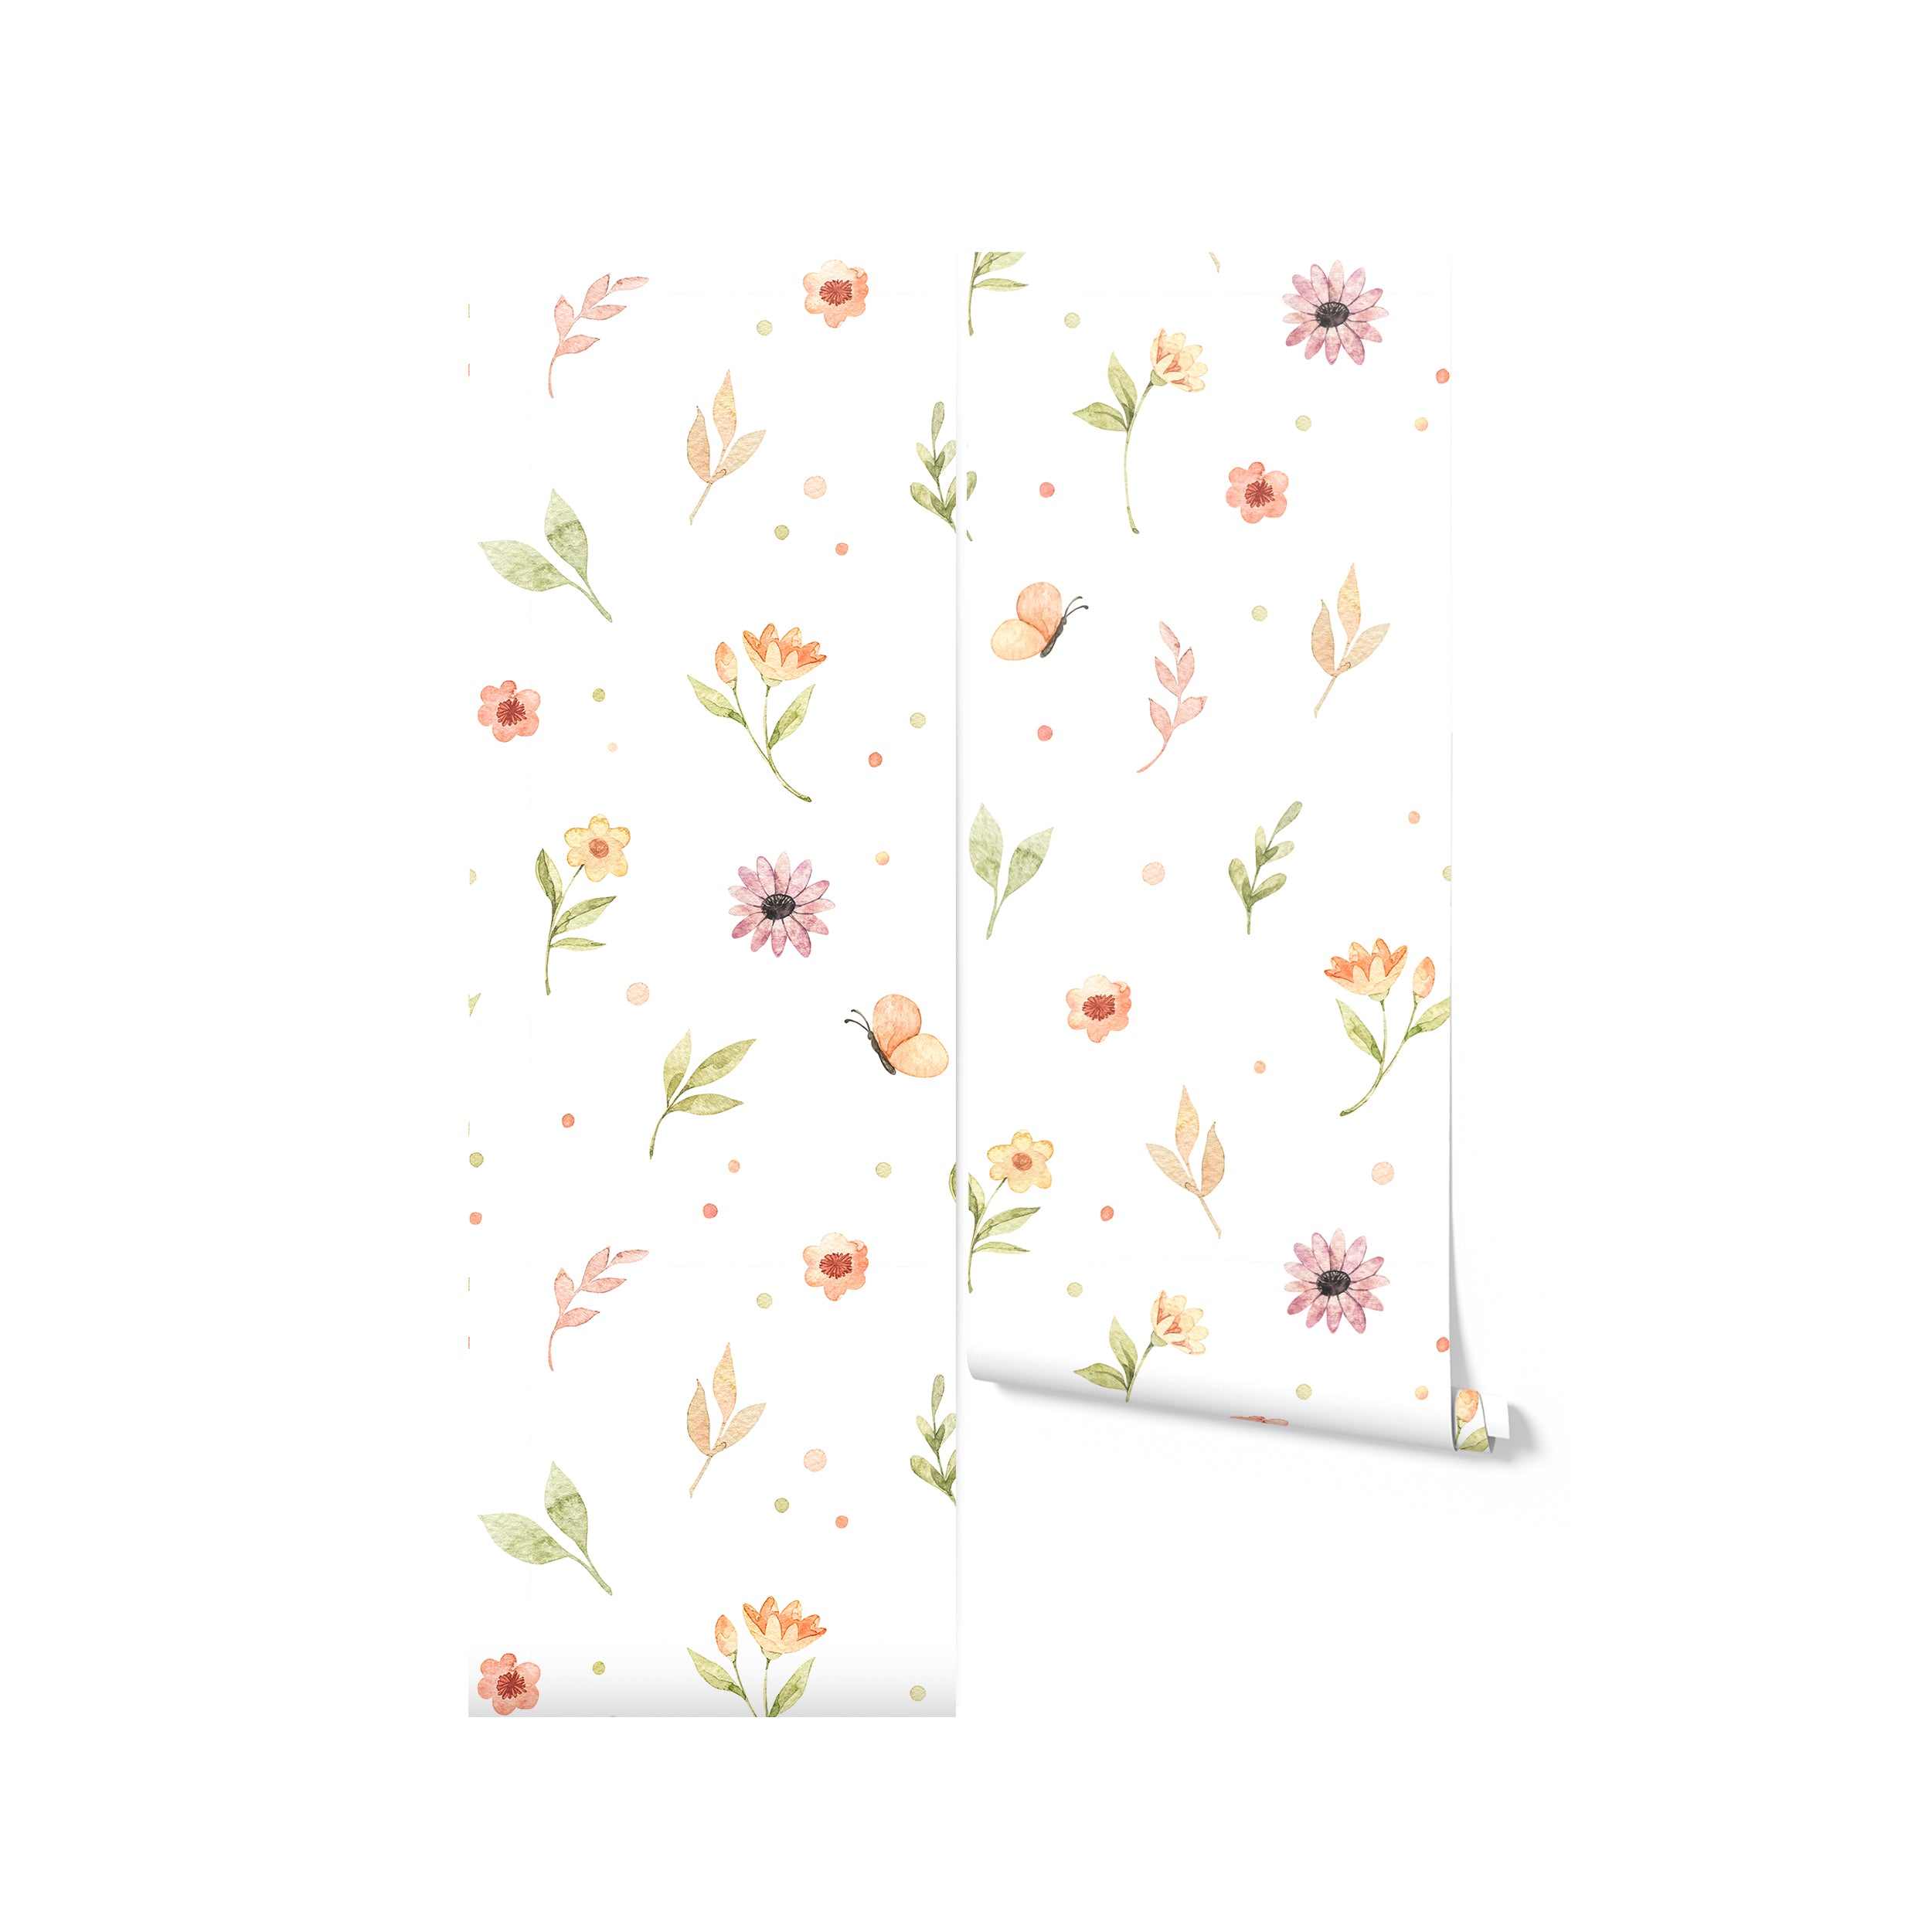 A roll of 'Butterfly and Flower Wallpaper' partially unrolled against a white background, displaying the charming watercolor flowers and butterflies scattered among soft dots. The artwork brings a touch of spring and liveliness, ideal for adding a gentle pop of color to any space.